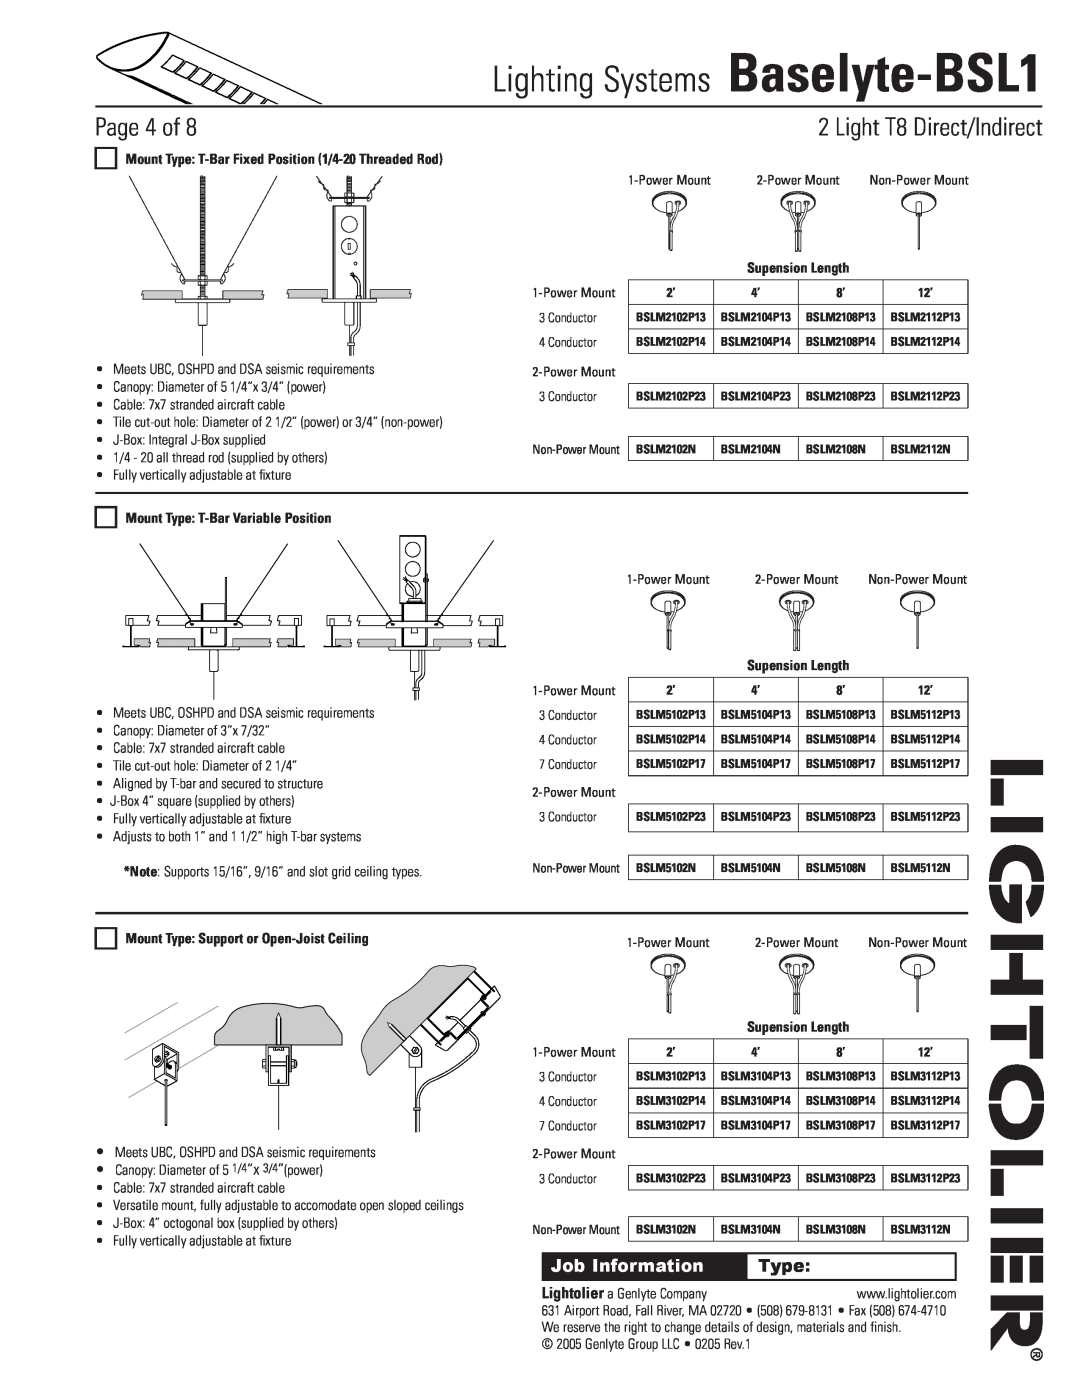 Lightolier Baselyte-BSL1 specifications Page of, Mount Type T-BarVariable Position, Mount Type Support or Open-JoistCeiling 